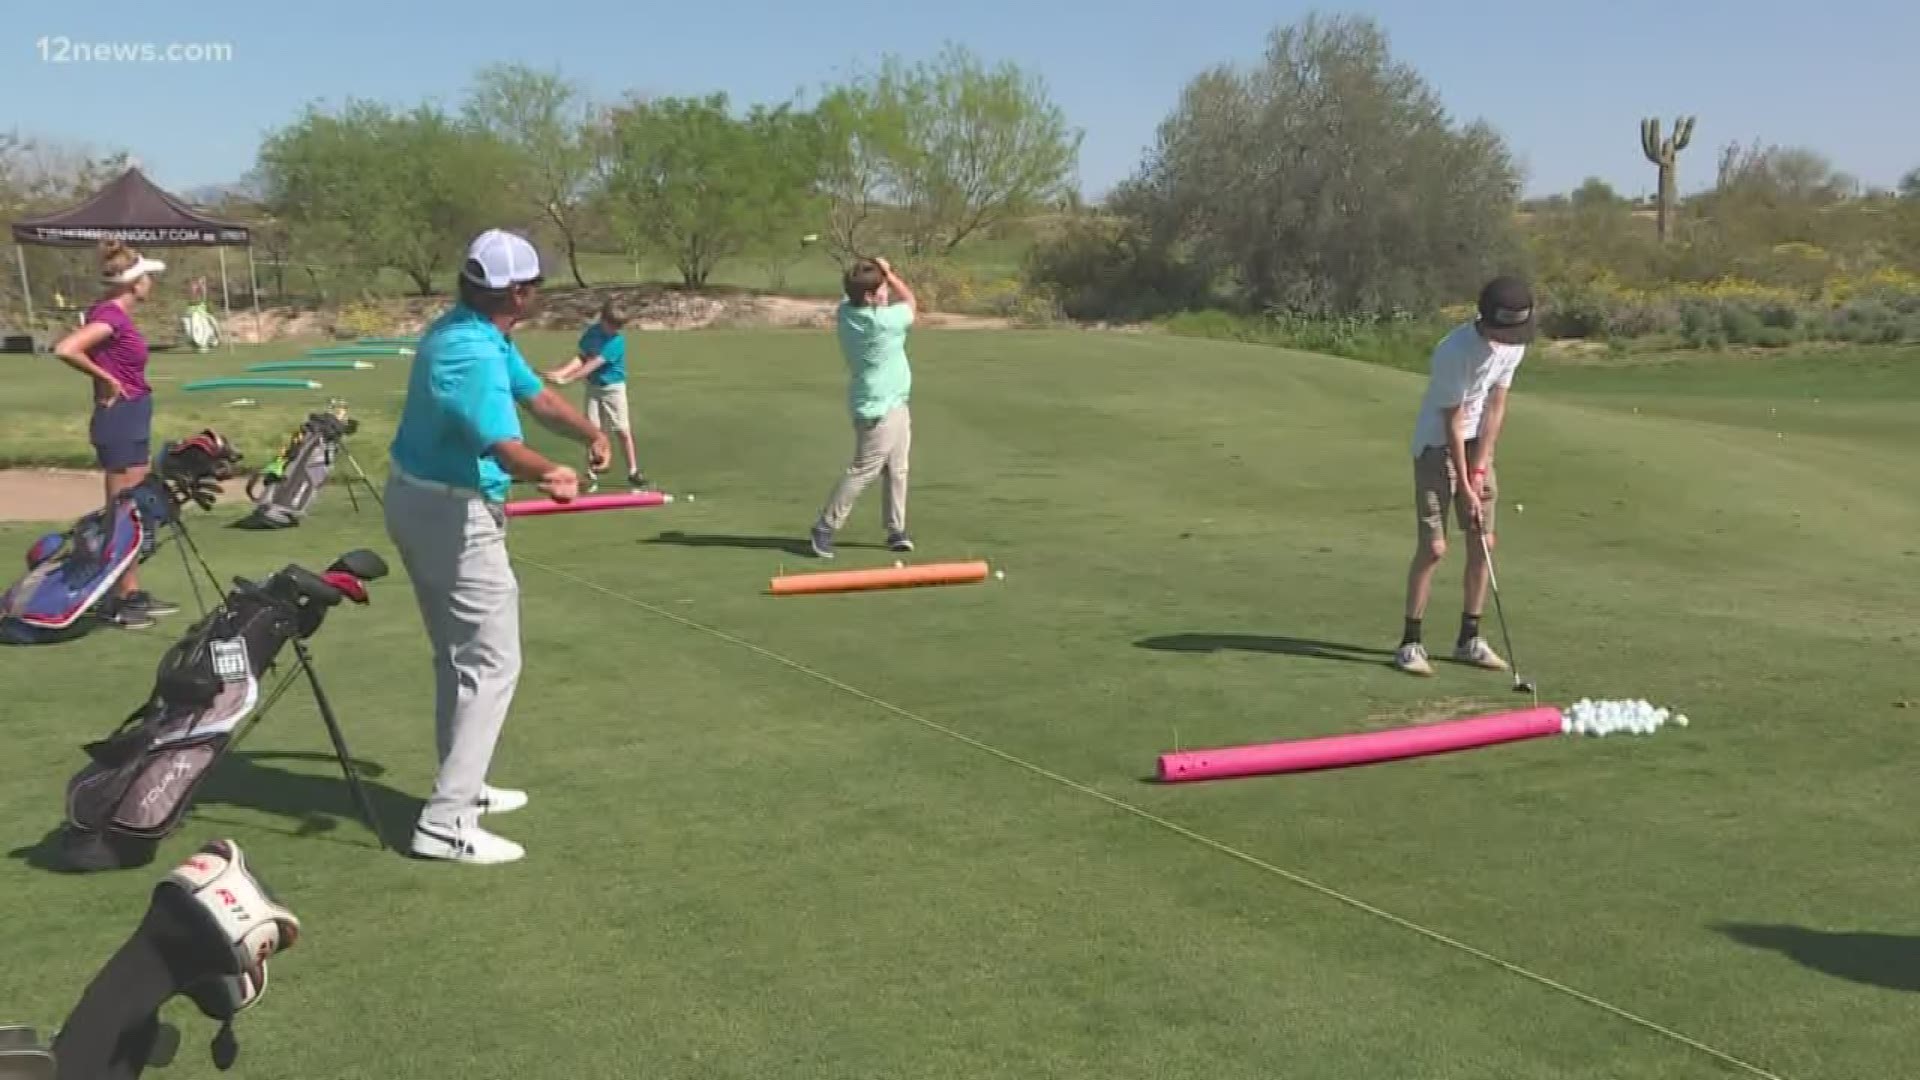 Gov. Ducey labeled golf as an "essential service" to not be closed during the pandemic. We talk to golfers in the Valley to see just how essential they think it is.